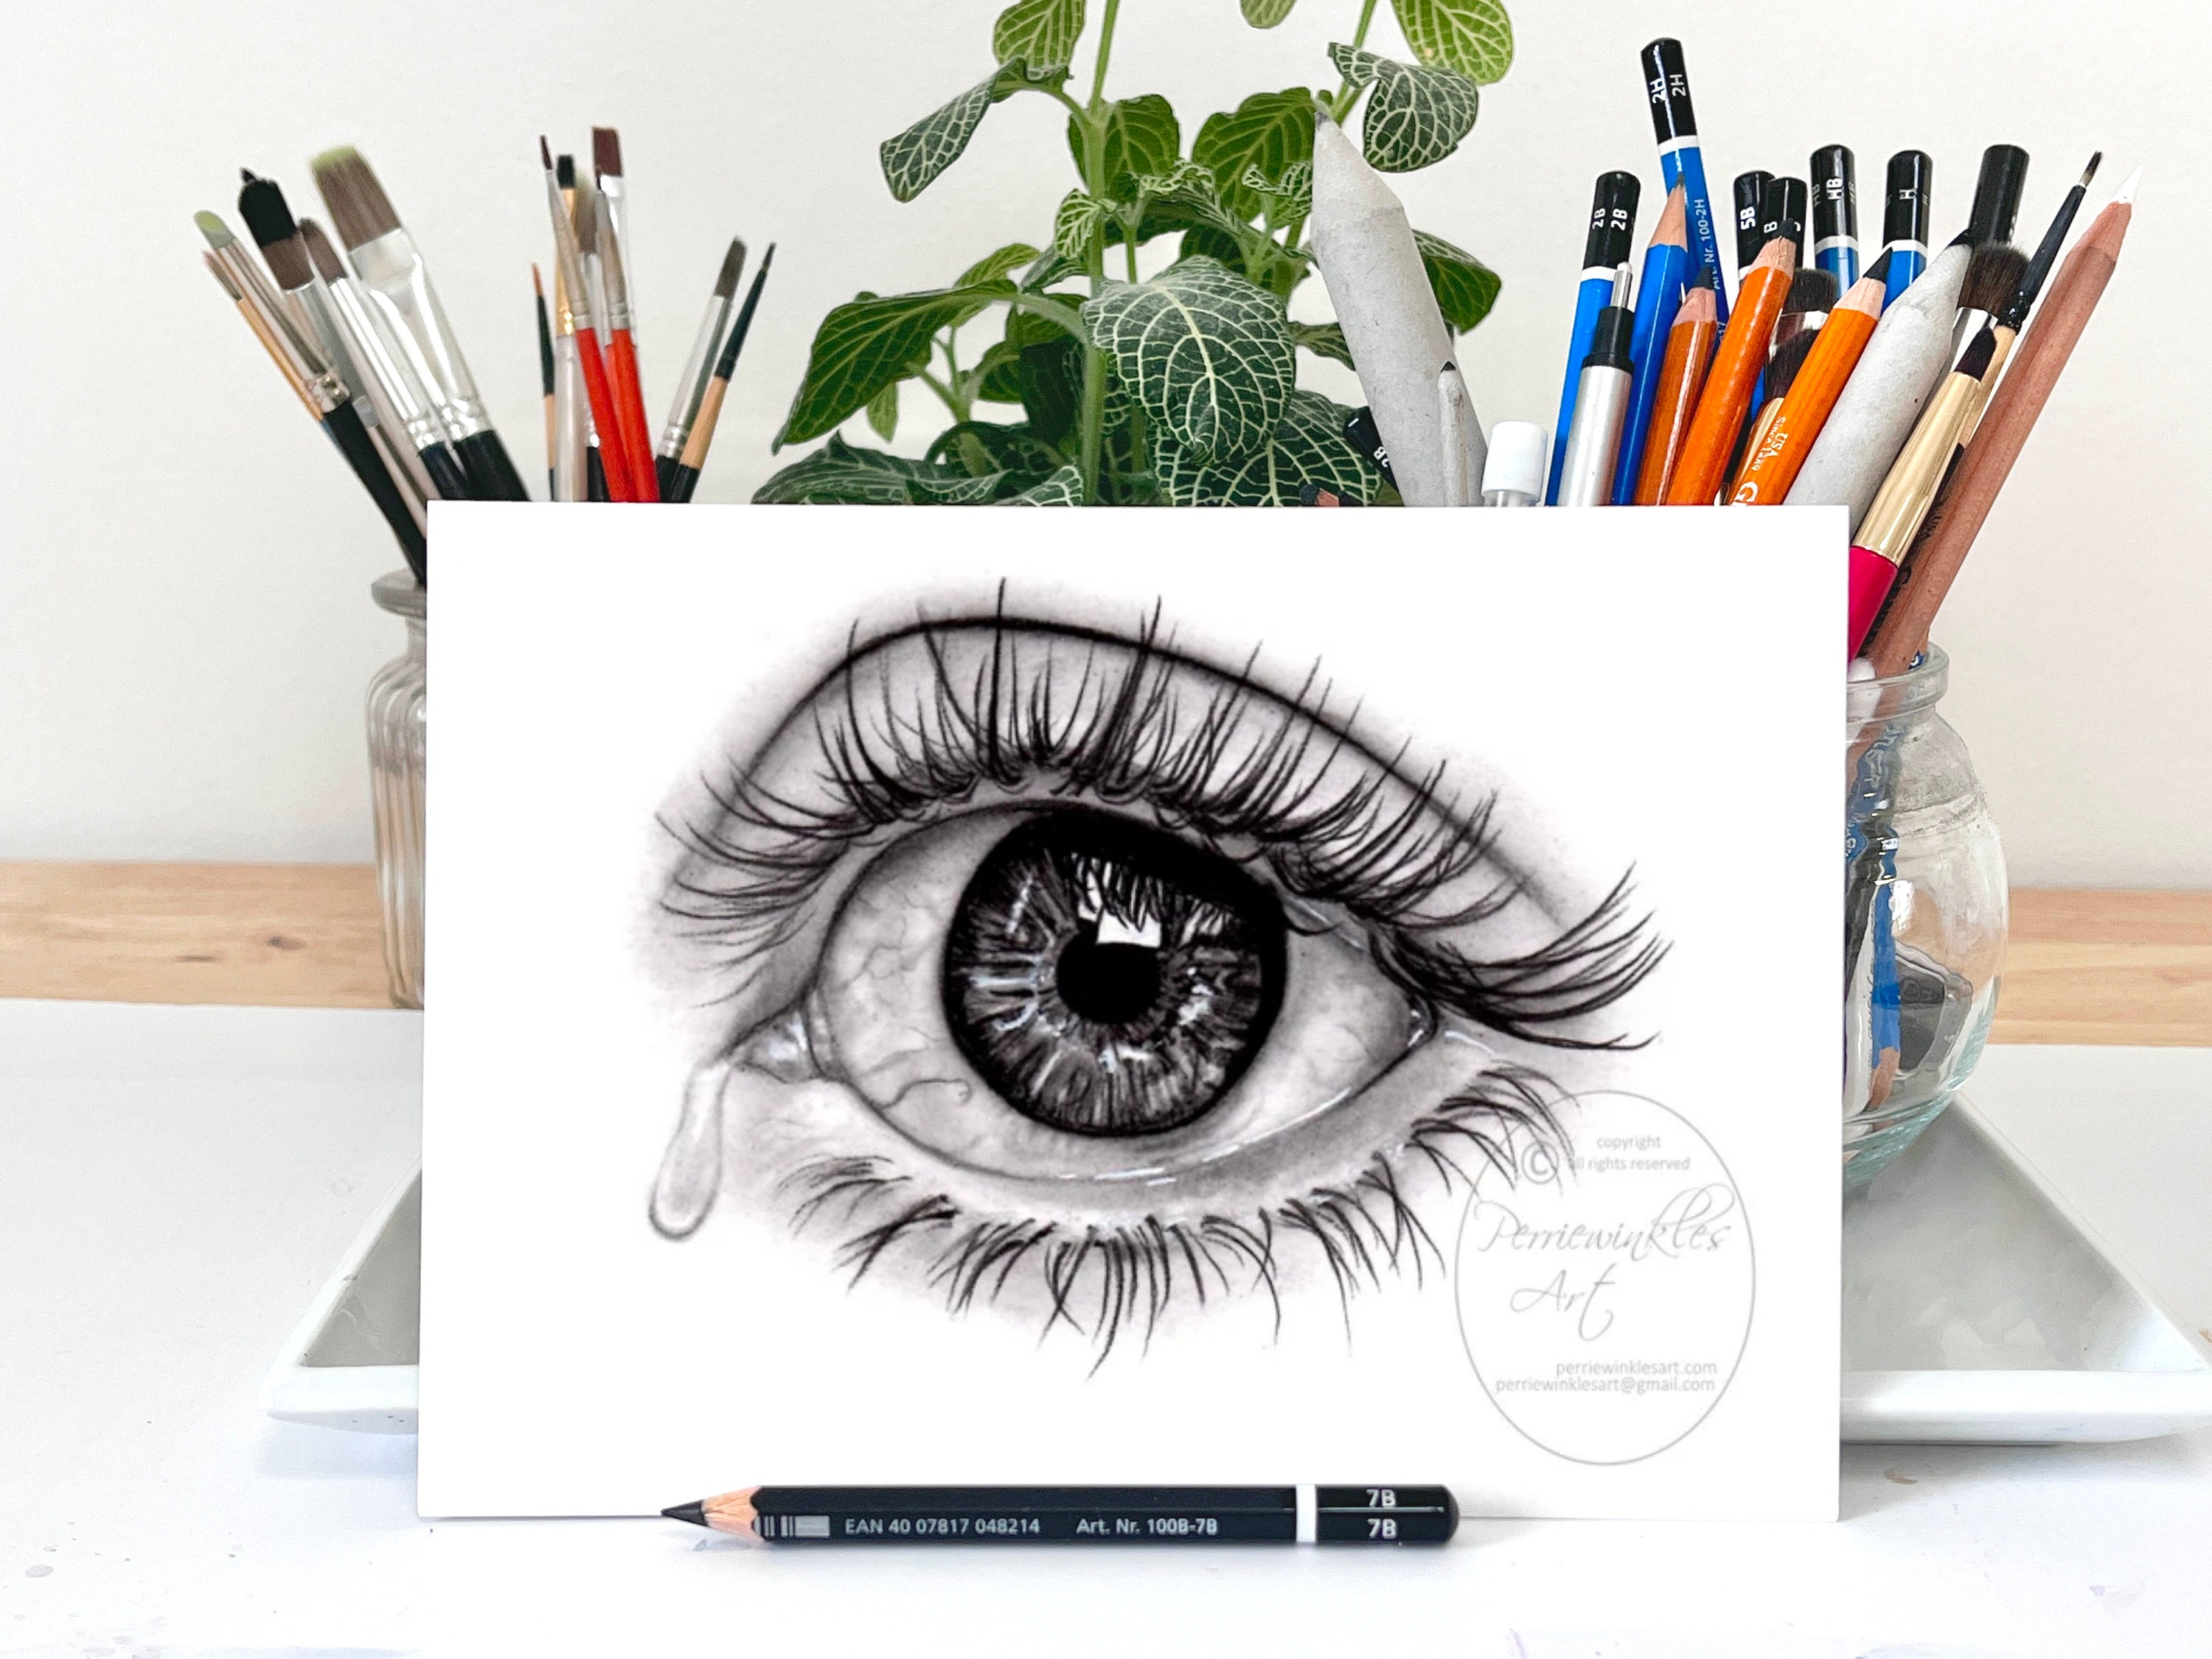 Colored Pencil Eyeball With Veins Art Board Print for Sale by